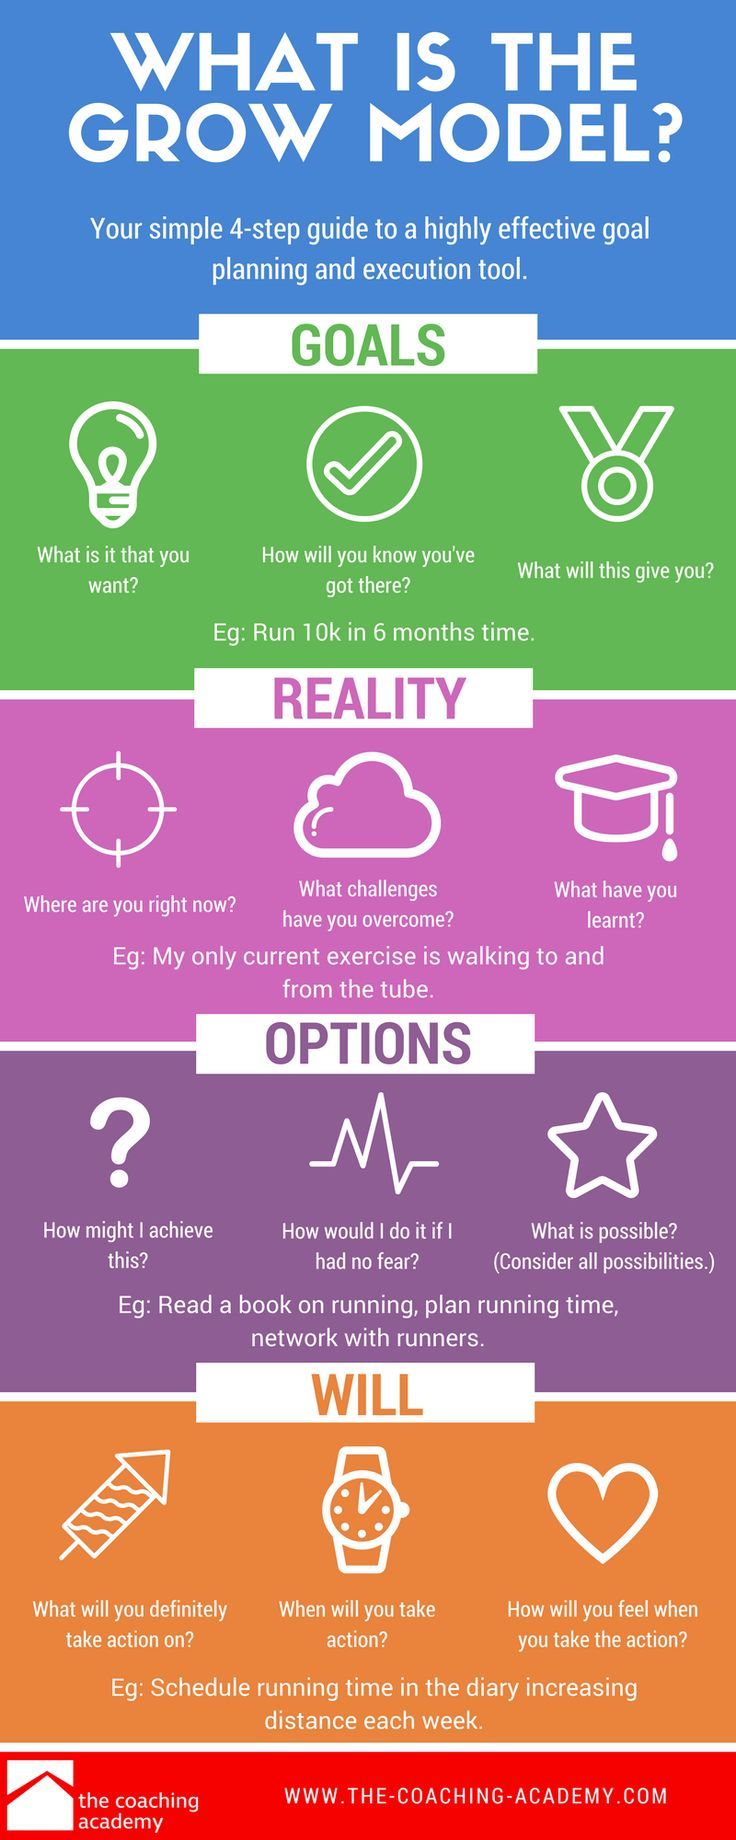 GROW Model Infographic - From The Coaching Academy